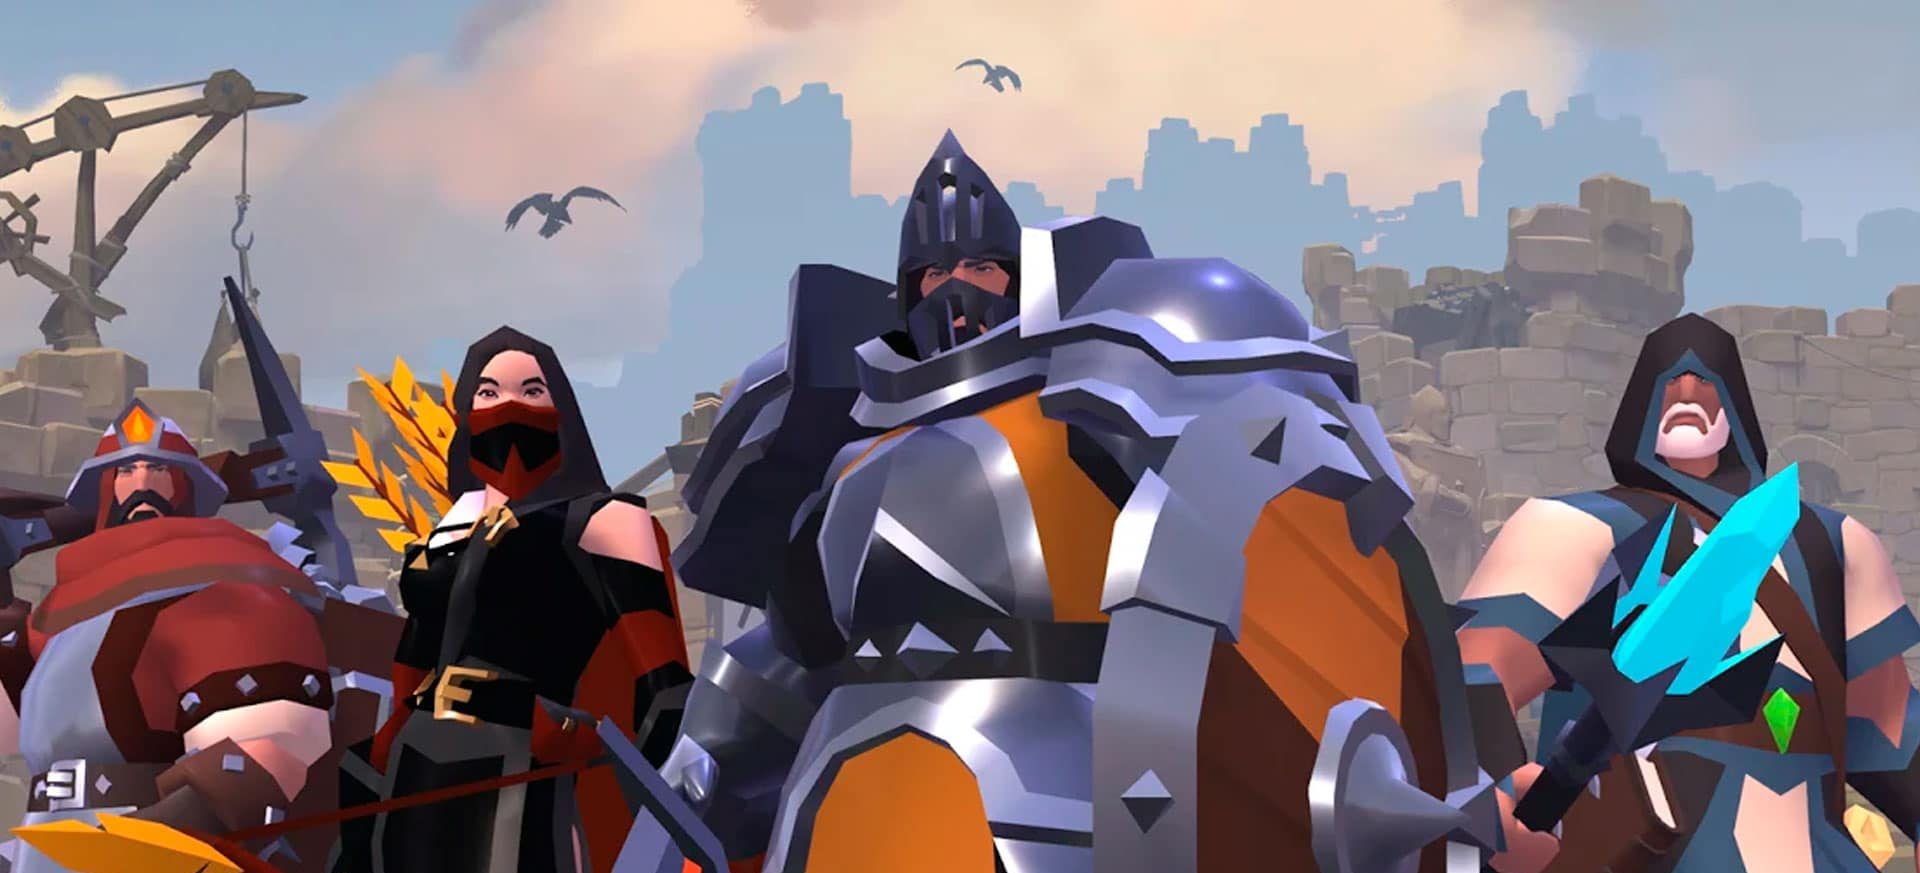 Albion Online Goes Mobile June 9th 